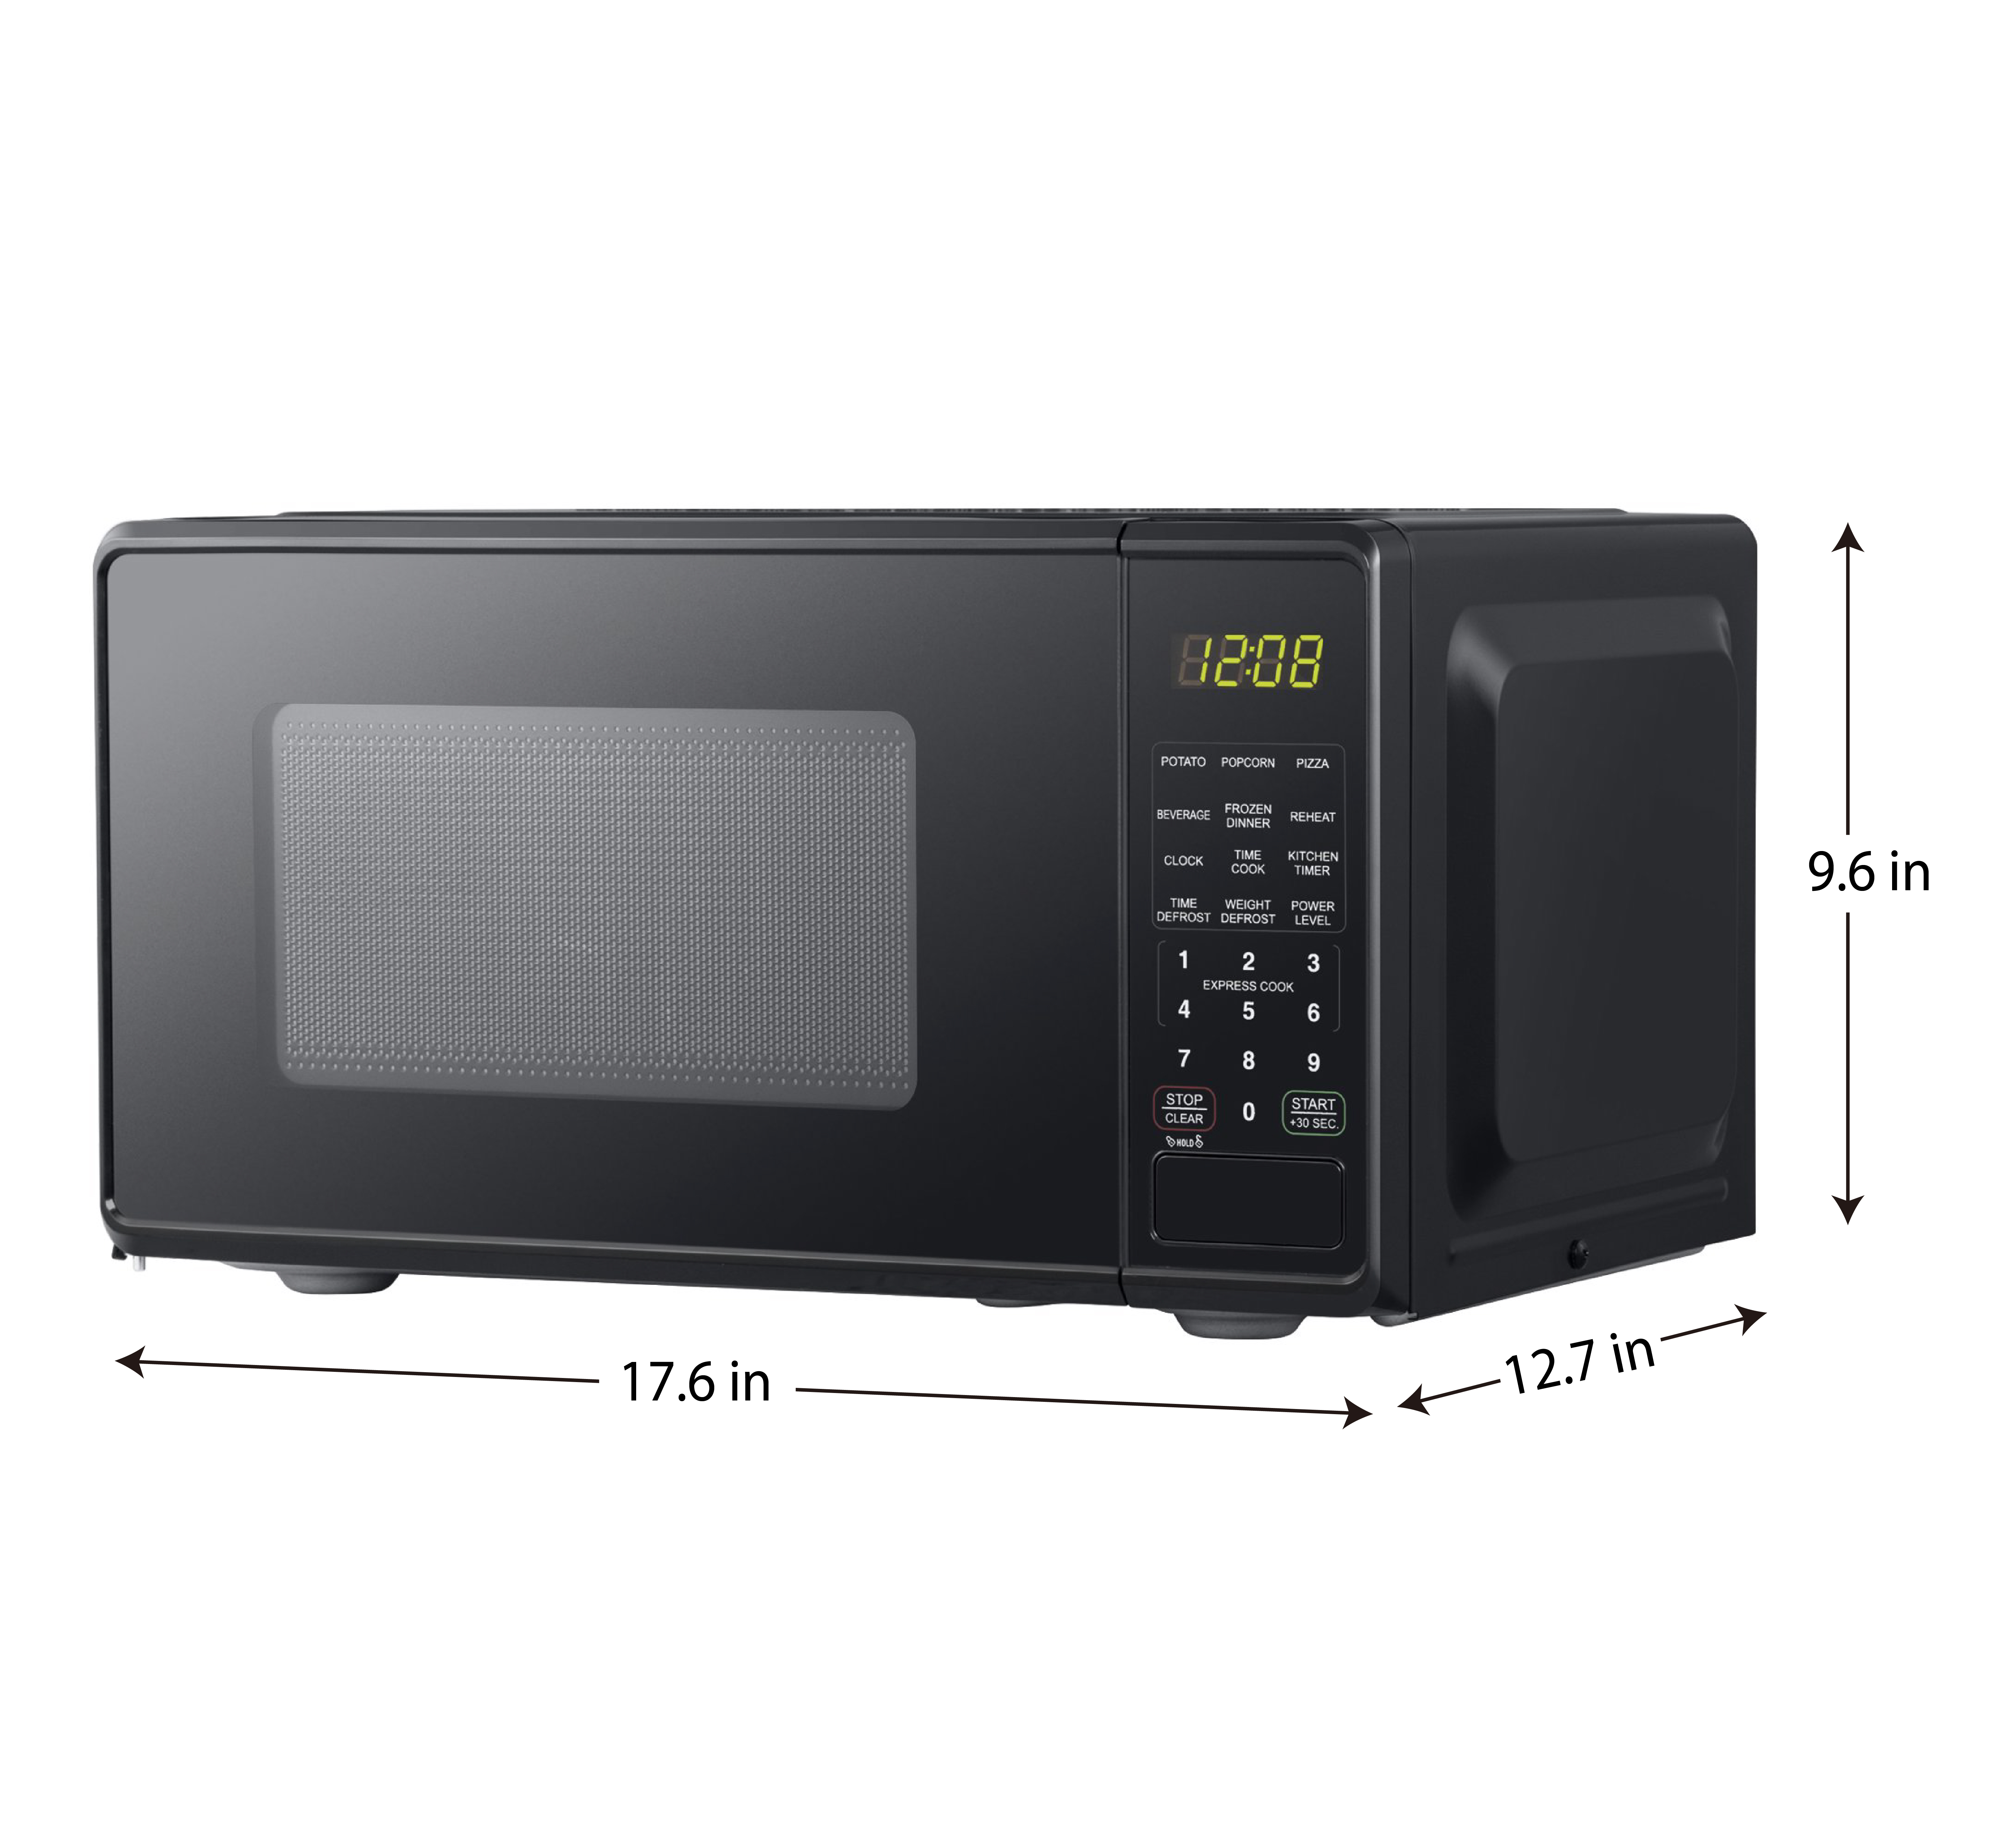 Mainstays 0.7 Cu ft Countertop Microwave Oven, 700 Watts, Black, New - image 8 of 10